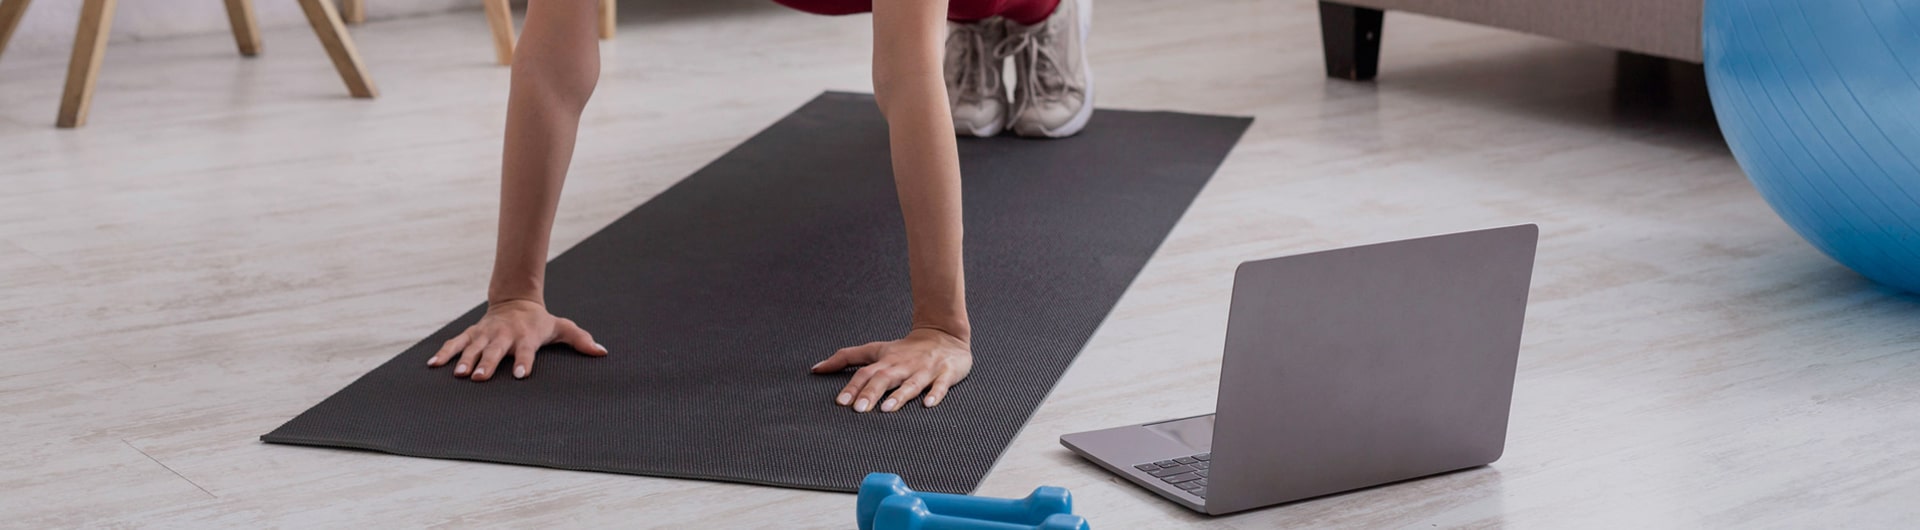 A person on a training mat with a laptop and dumbells at their side.